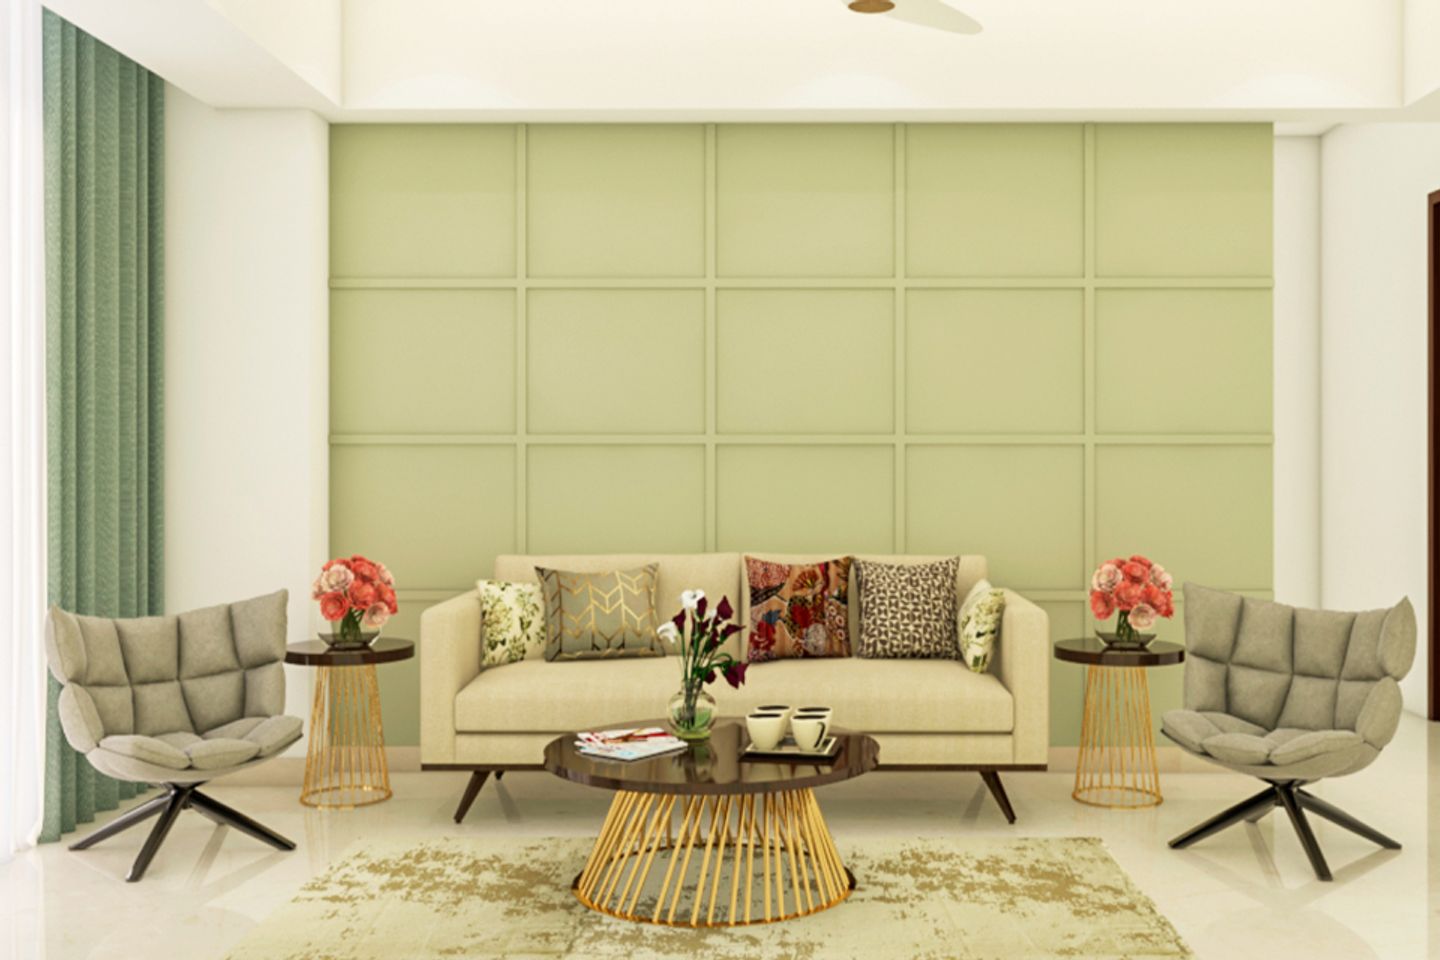 Green Living Room Wall Design With Wall Trims - Livspace